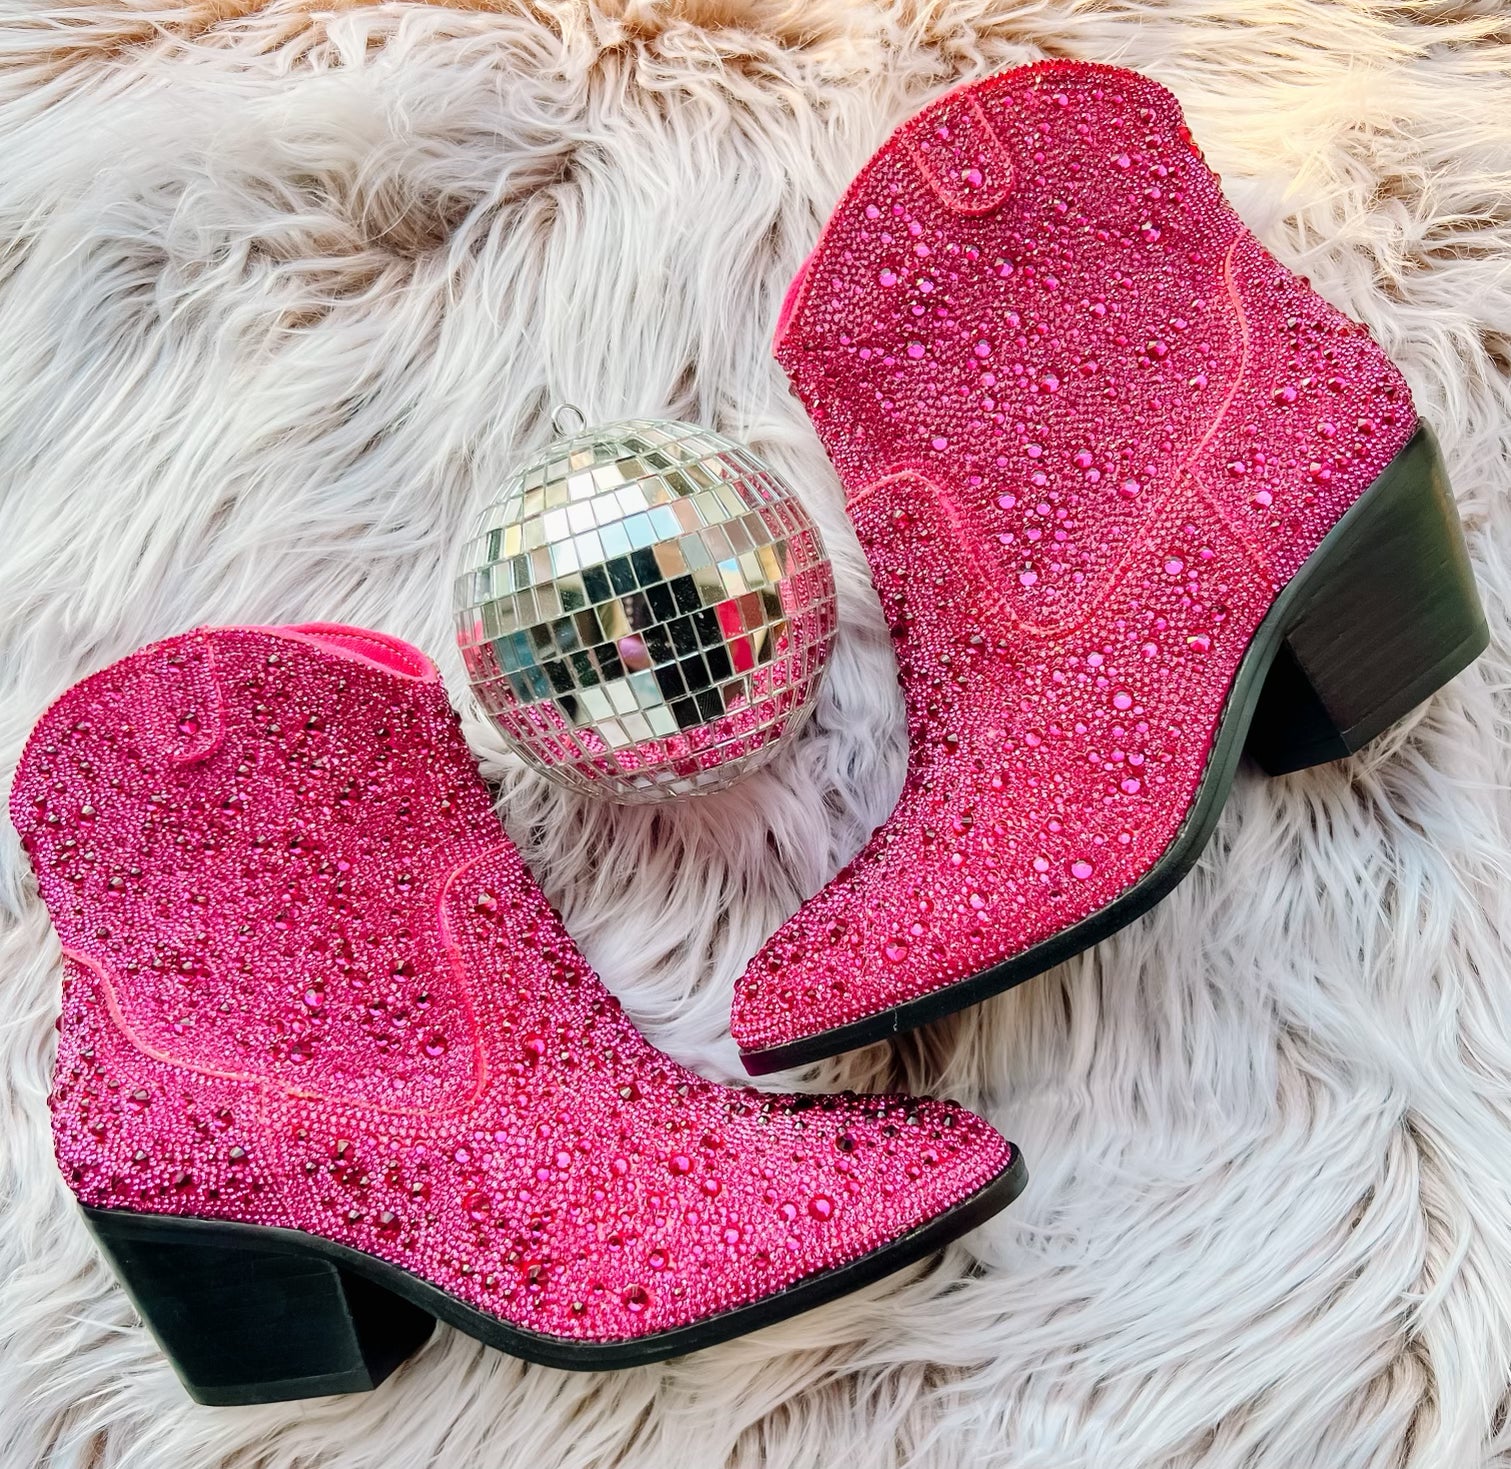 Rhinestone Western Ankle Boots - BeLoved Boutique 